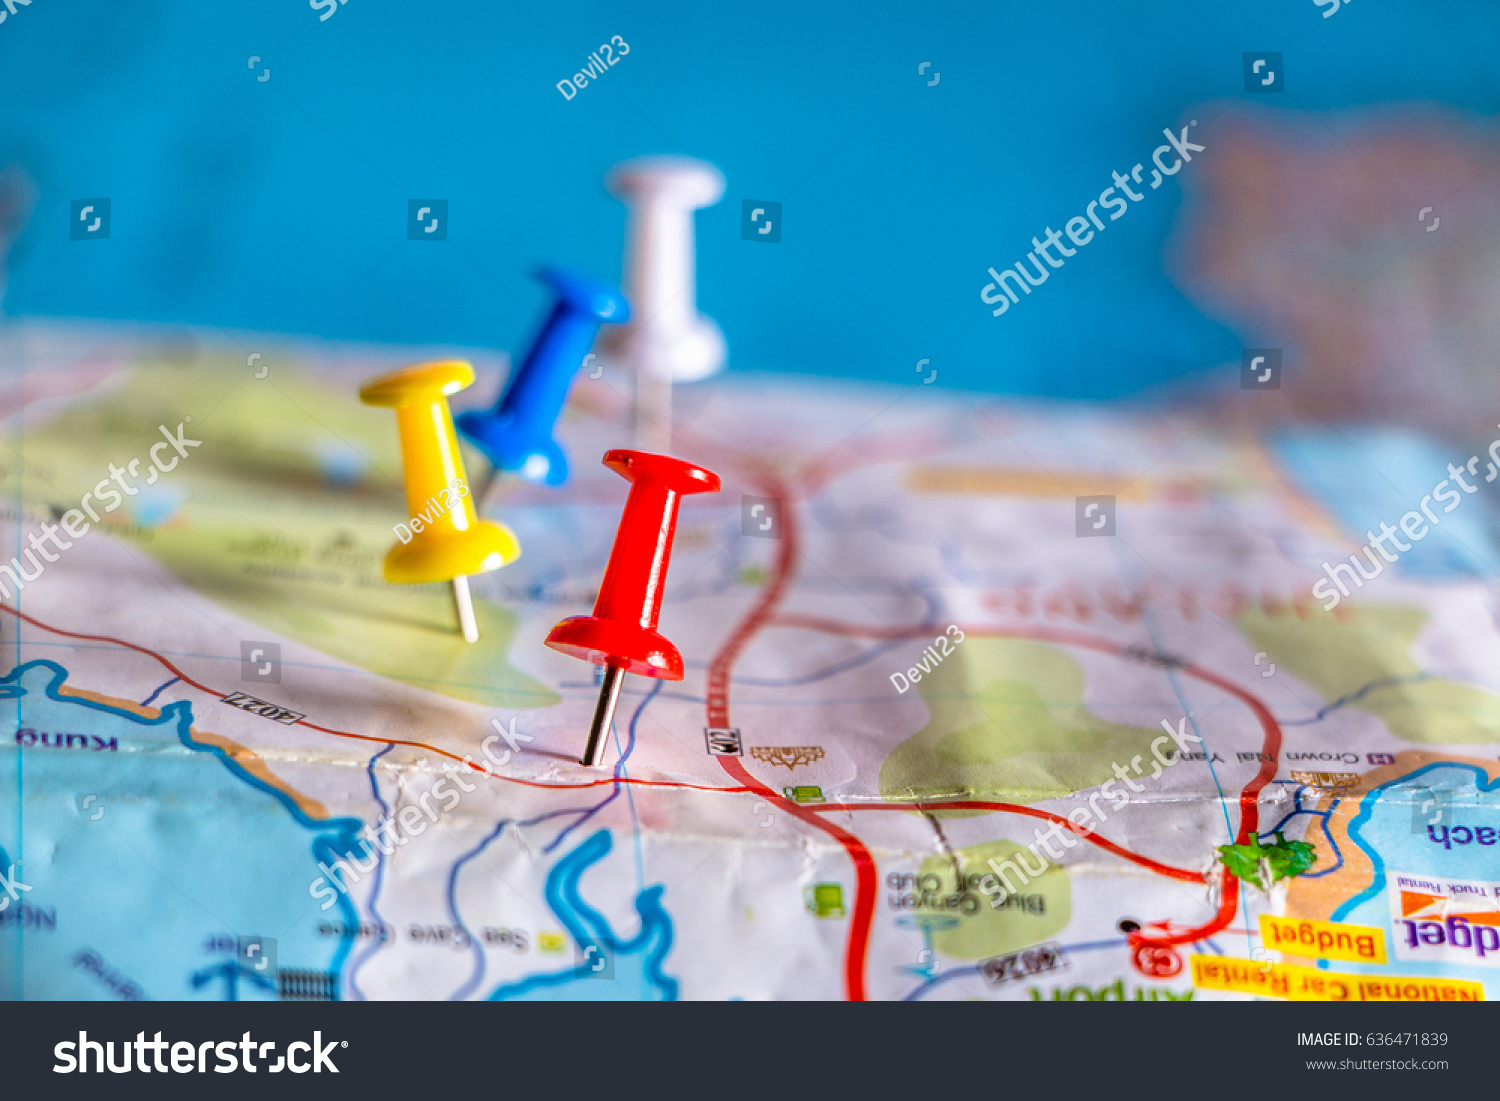 Travel destination pin points on a map with colorful thumbtacks and depth of field with select focus. #636471839